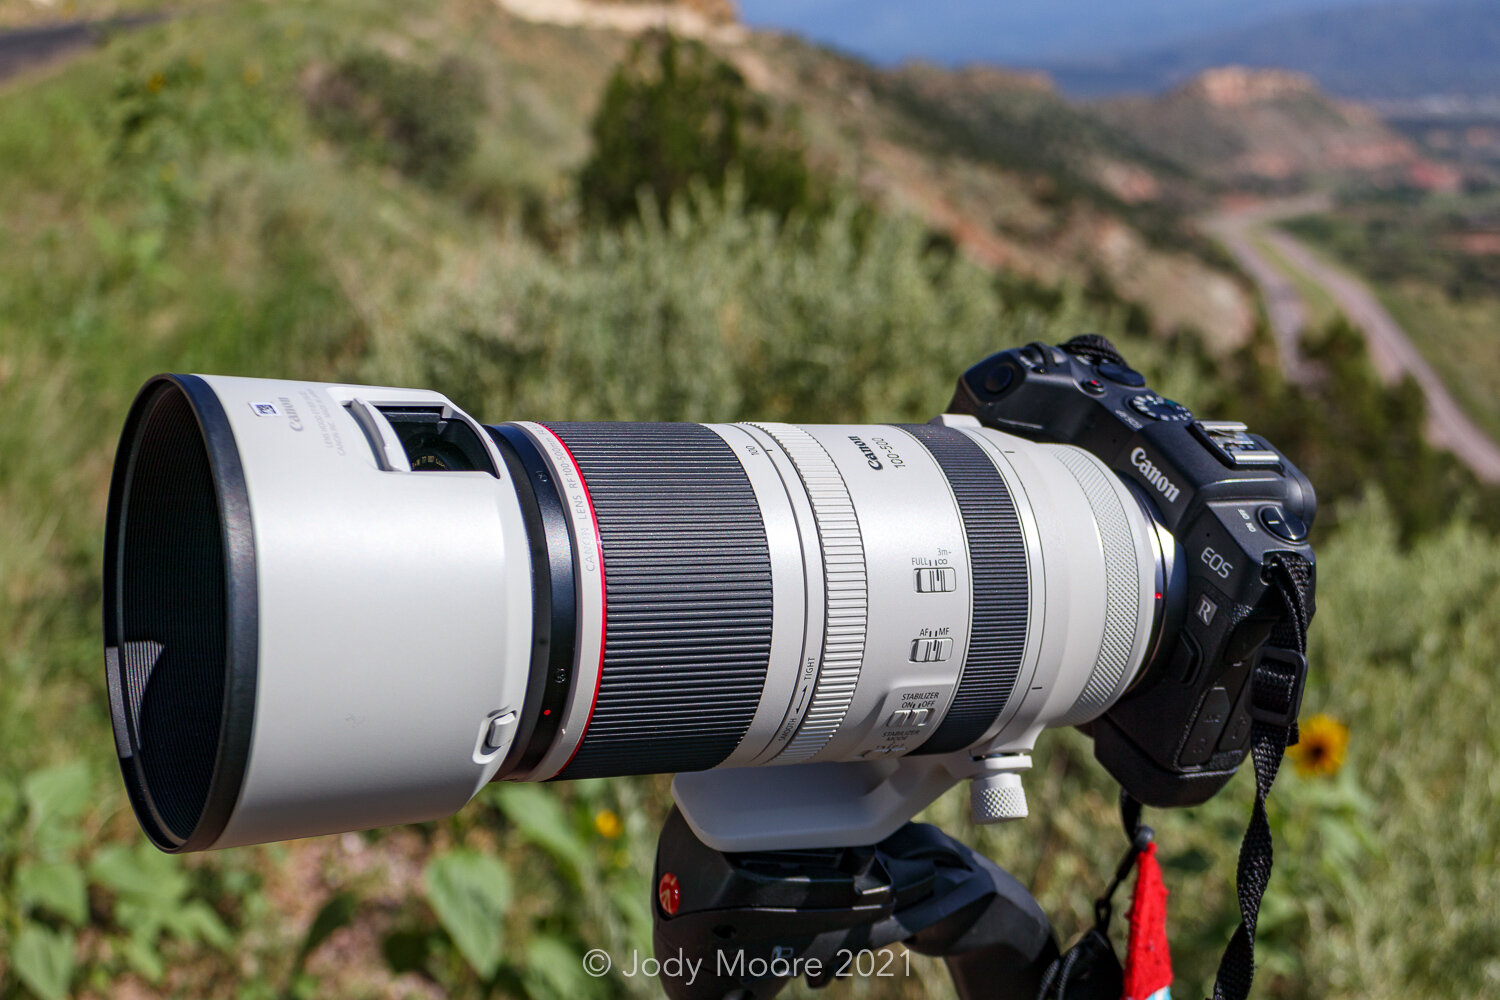 Canon RF 100-400mm f/5.6-8 IS USM Lens Review Pros, Cons, and Alternatives